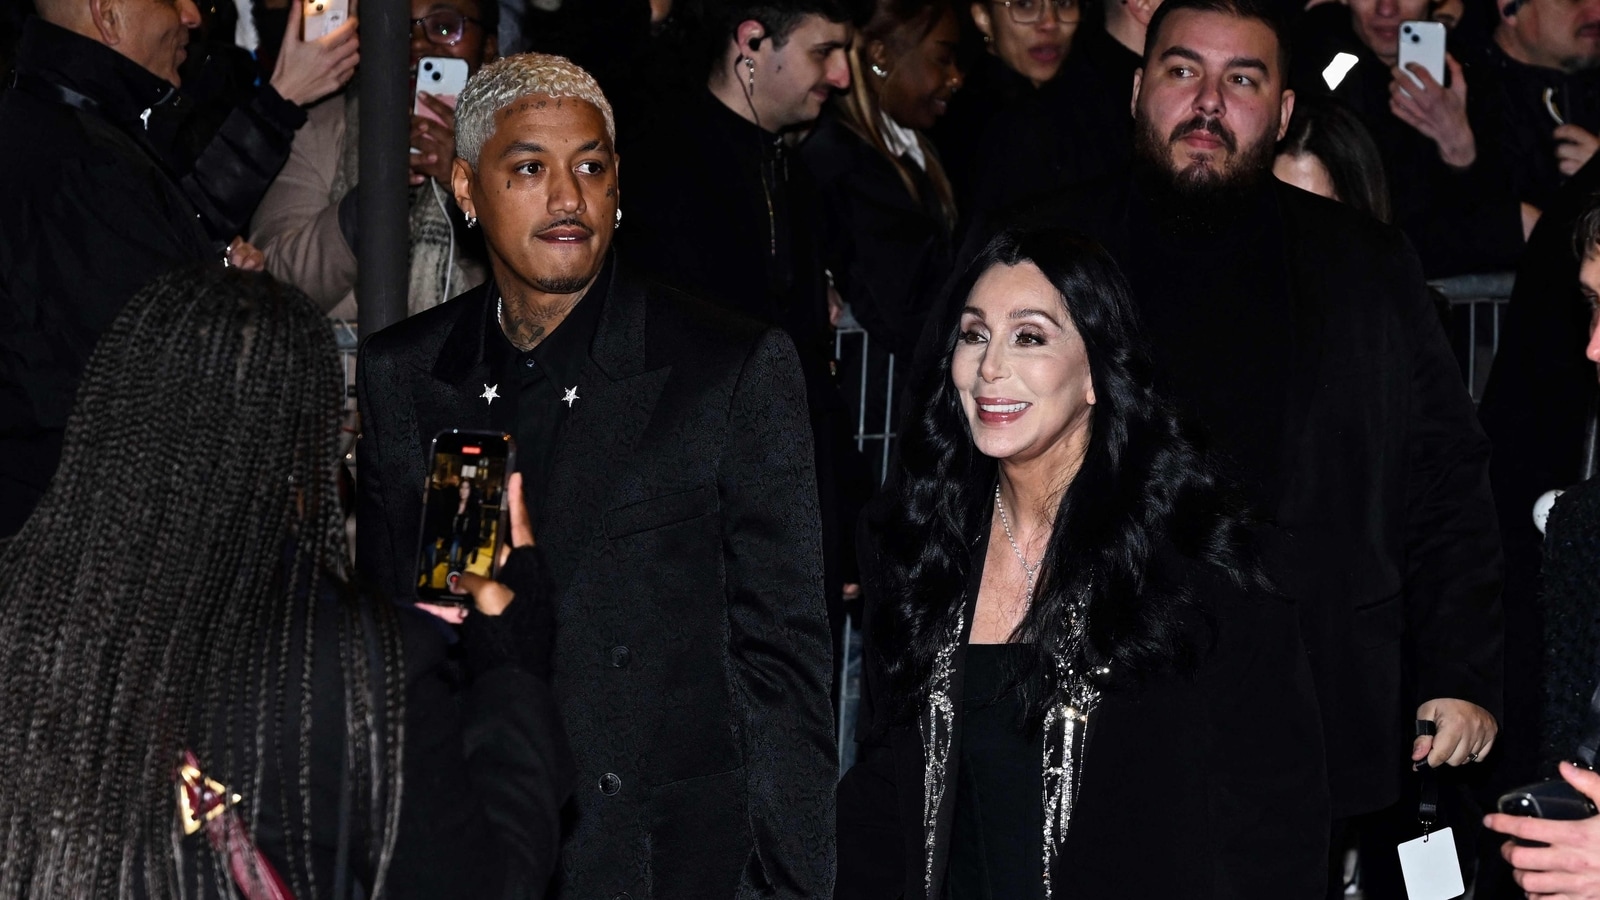 Cher twins with boyfriend Alexander Edwards, 38, at Paris Fashion Week, fans amazed at her youthfulness at 77